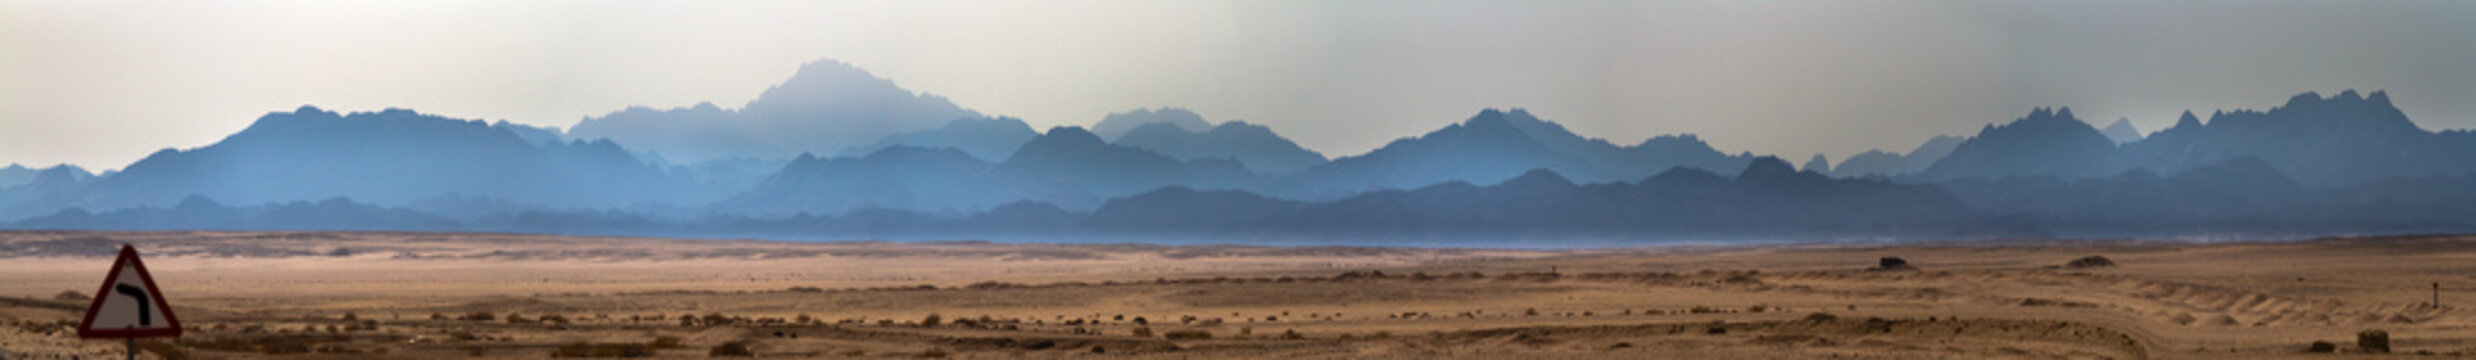 The desert and mountains © askaternoy